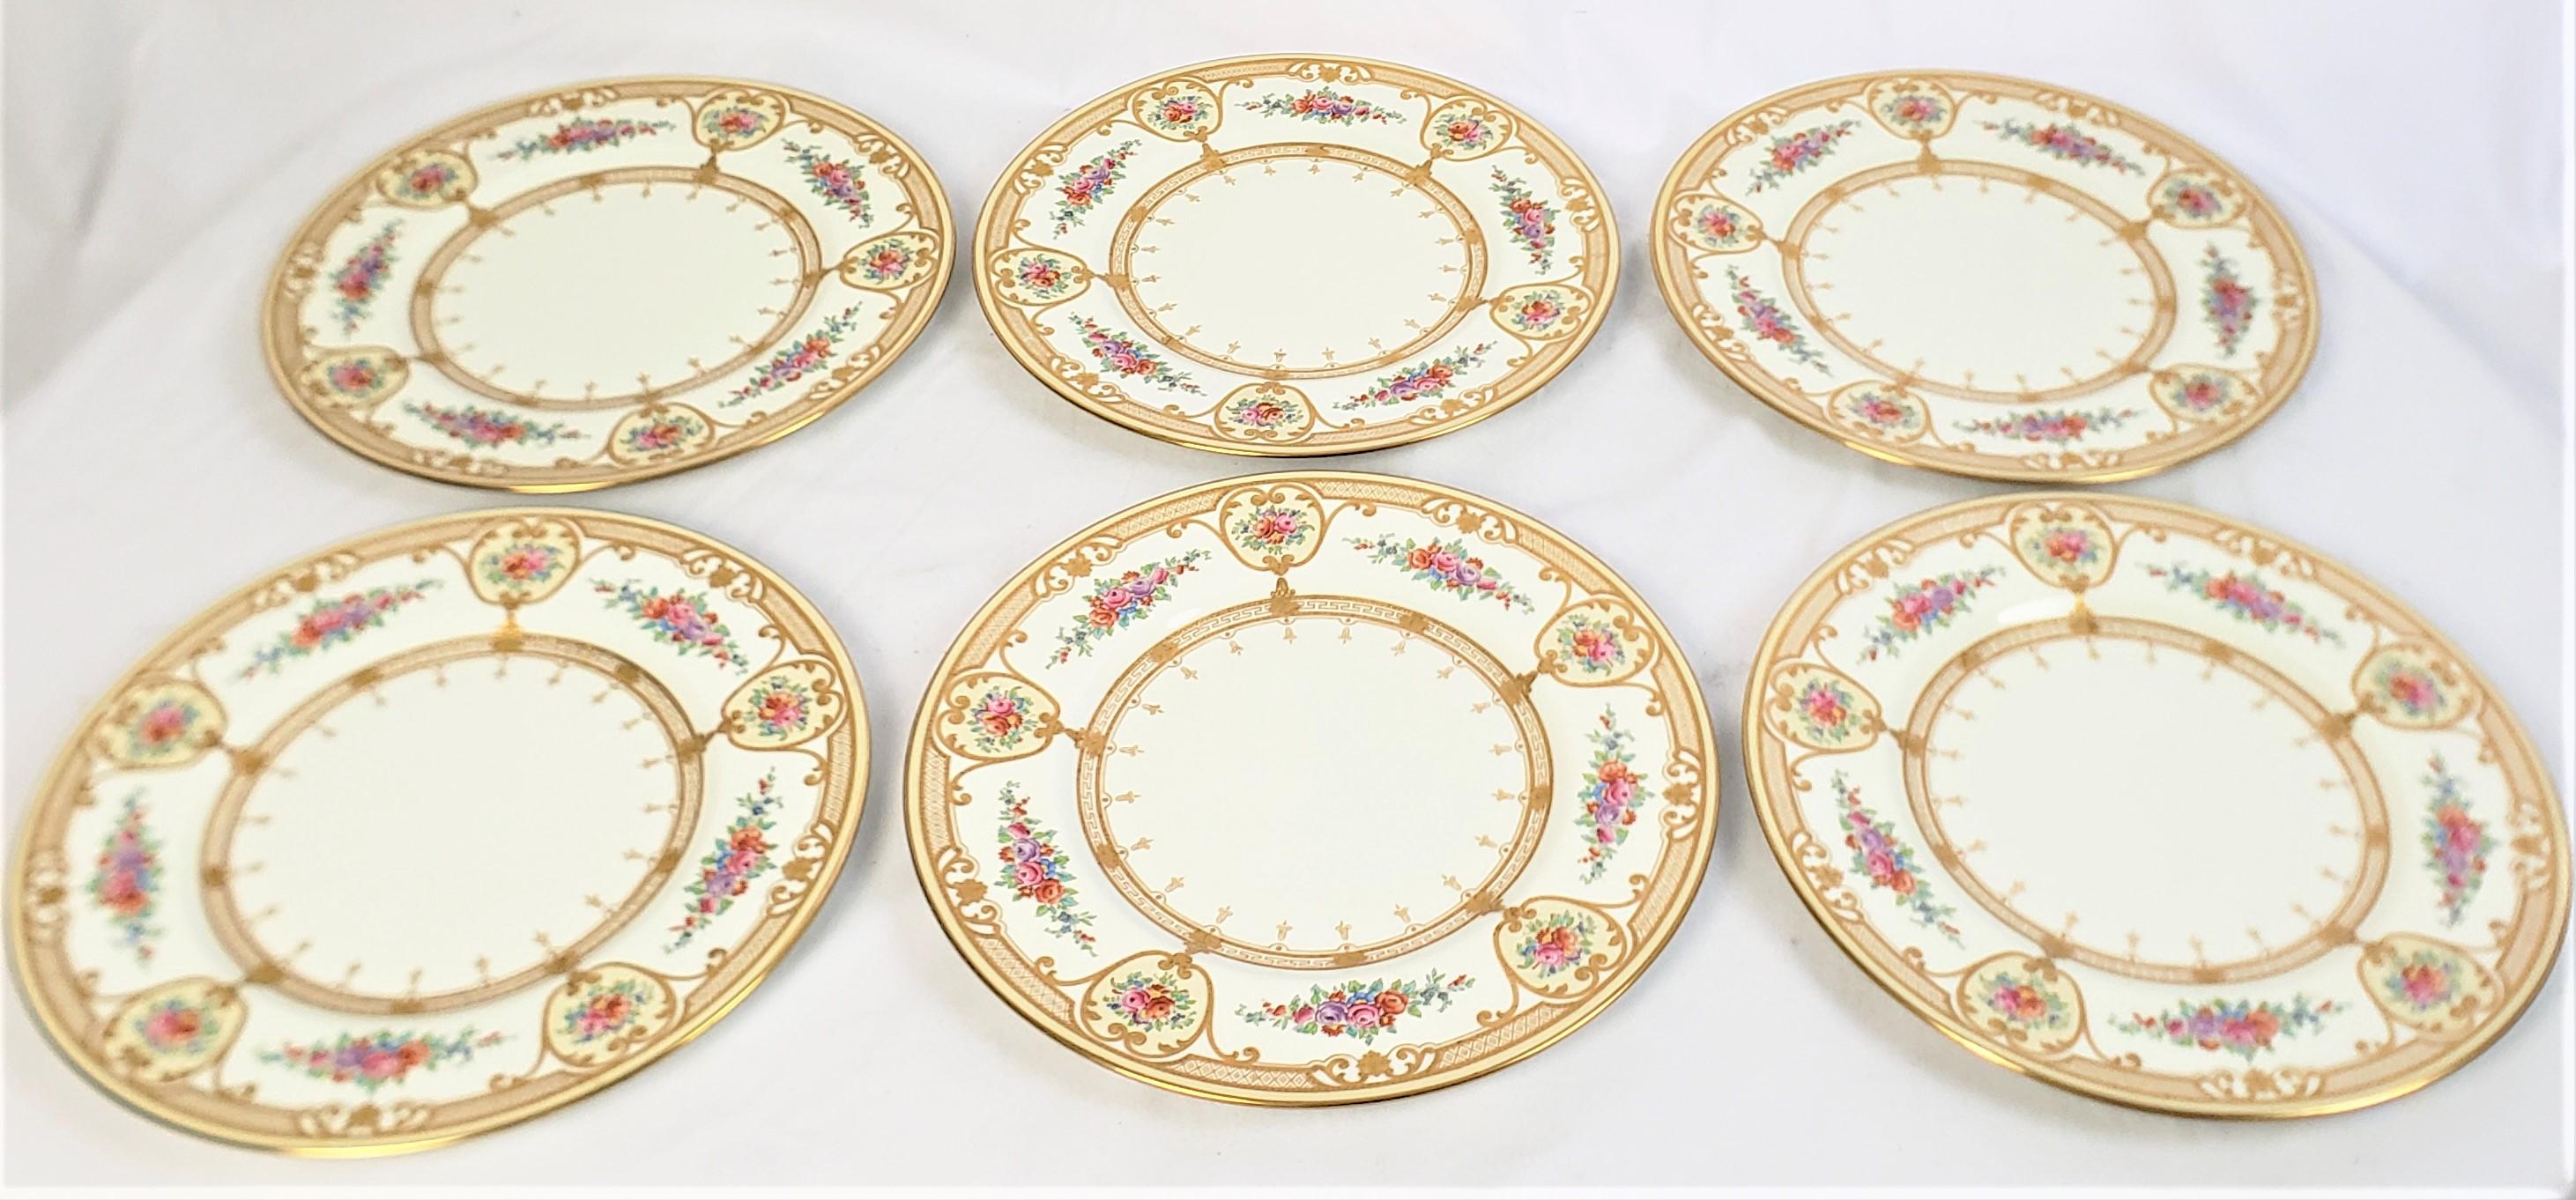 This set of twelve dinner plates were made by the well known Wedgewood factory of England in approximately 1900 in a Victorian style. The plates are composed of porcelain with a white ground with very ornately hand-painted bouquets of Spring flowers